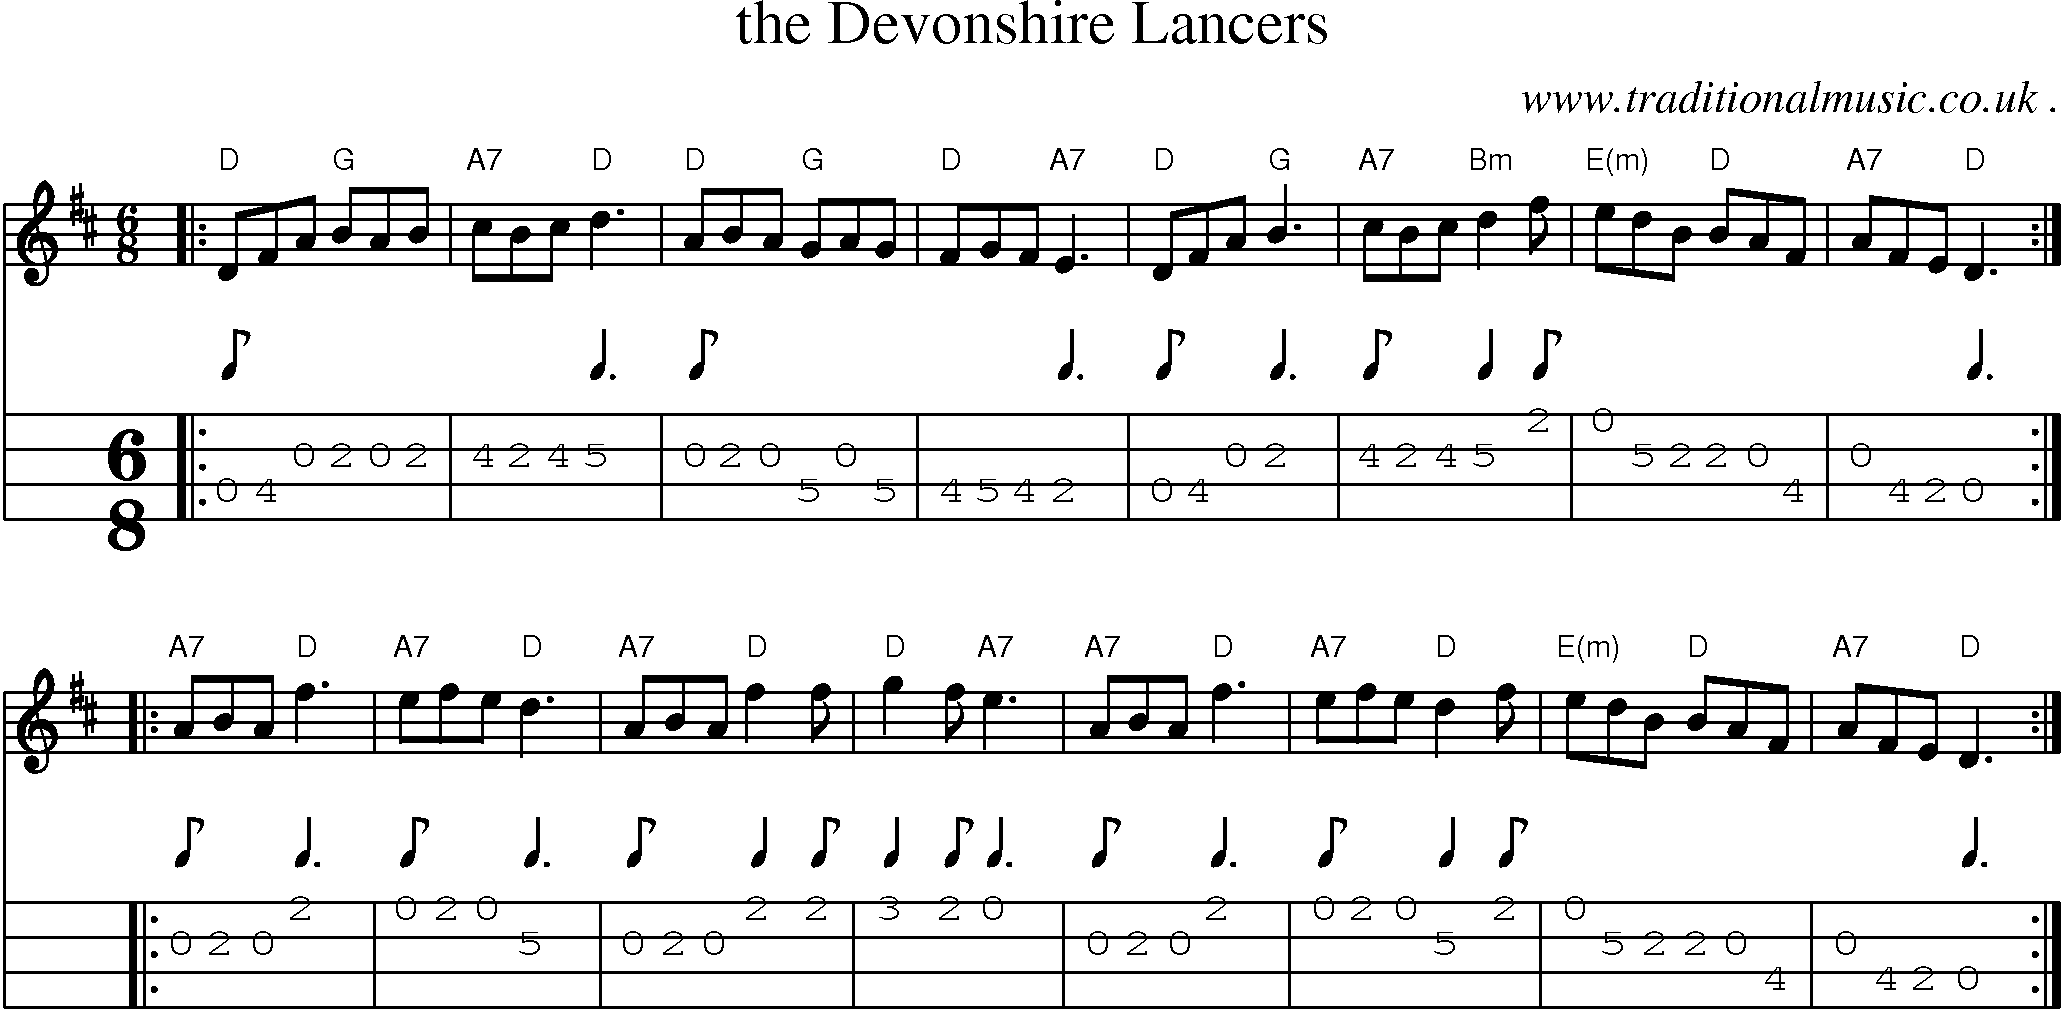 Sheet-music  score, Chords and Mandolin Tabs for The Devonshire Lancers